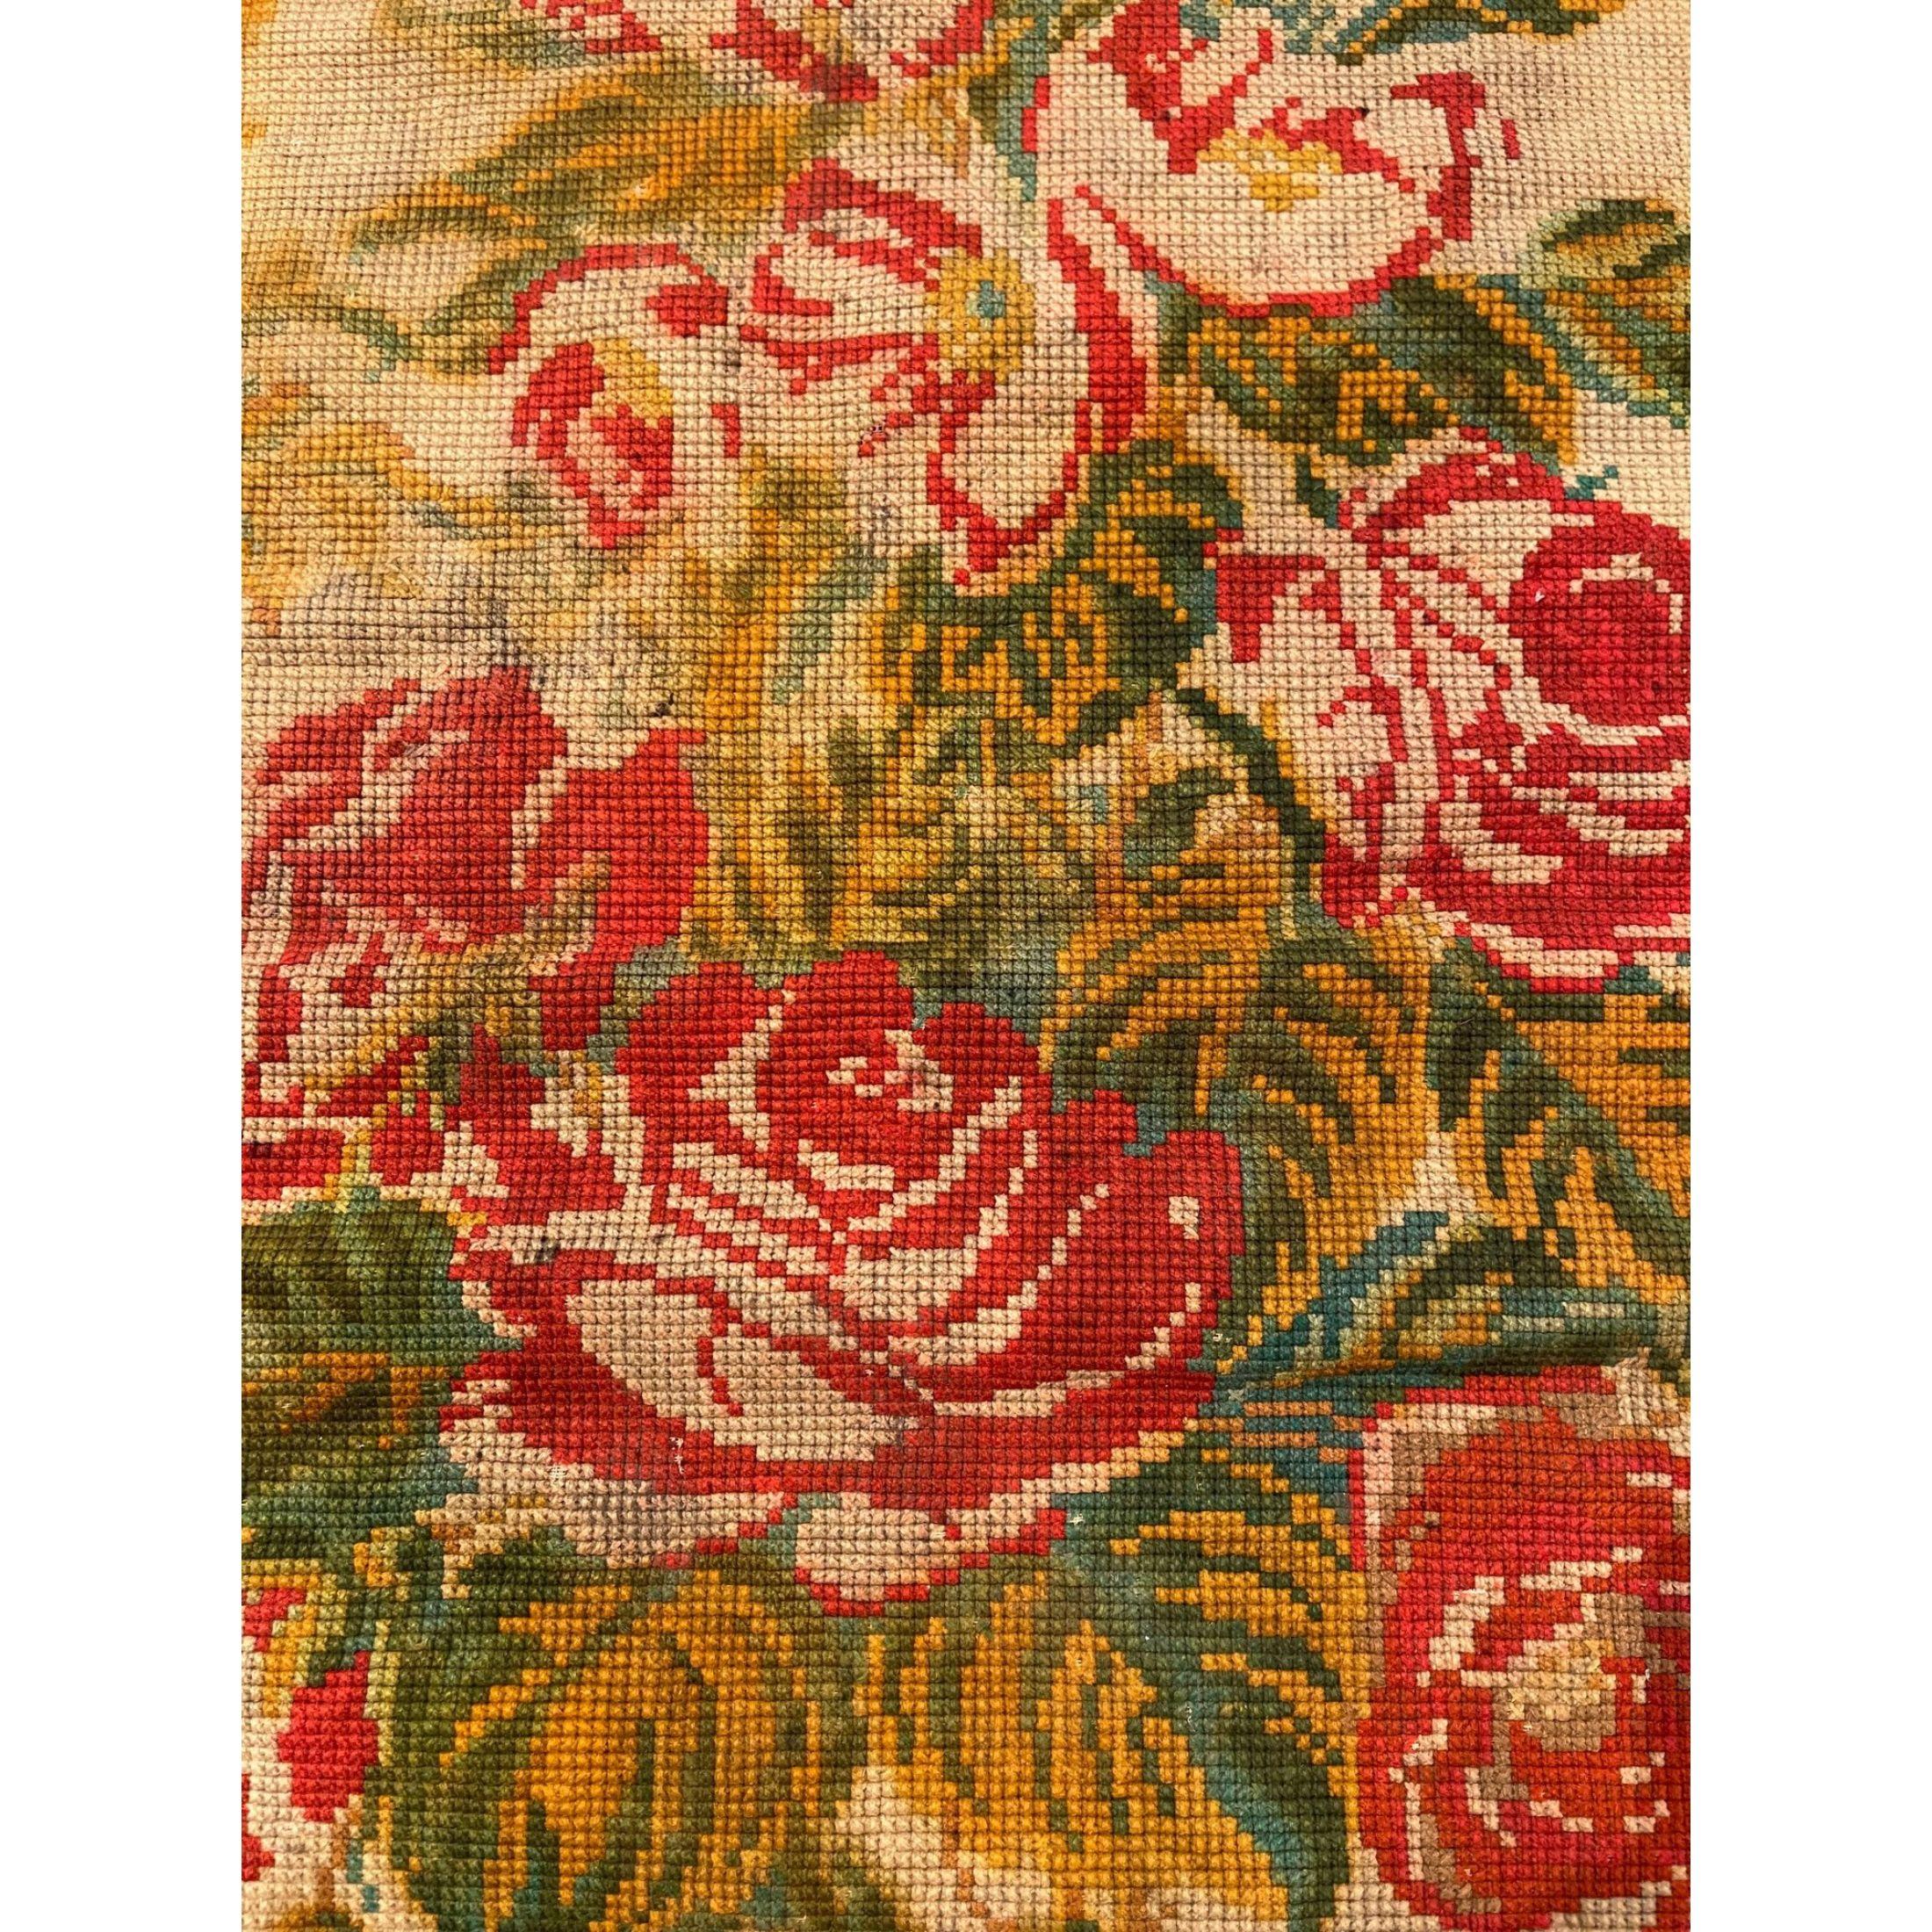 The technique for creating needlepoint rugs and other objects made from needlepoint has remained unchanged since its beginnings in the 17th century. It all begins with a canvas with evenly spaced warp and weft. It is often stiffened and made from an